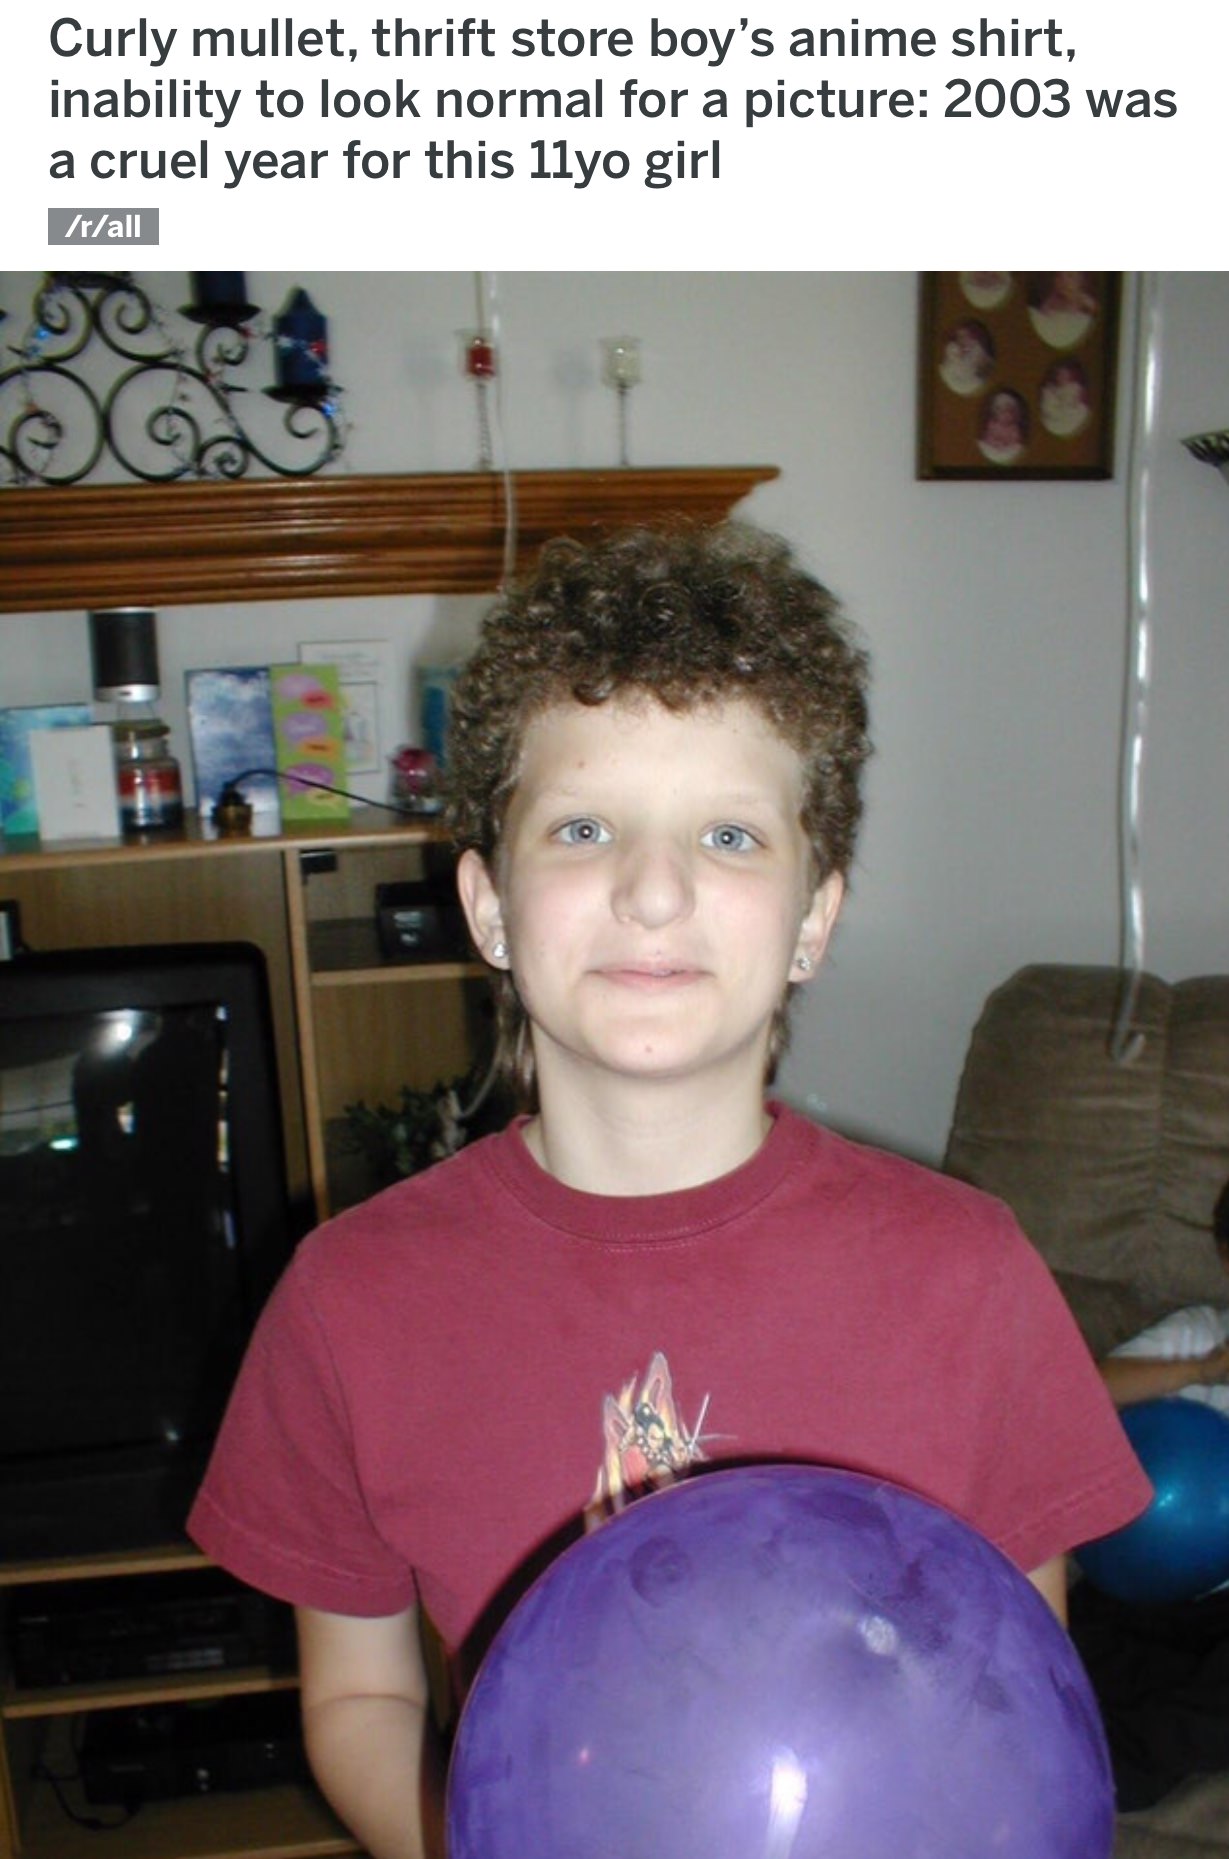 boy mullet - Curly mullet, thrift store boy's anime shirt, inability to look normal for a picture 2003 was a cruel year for this 11yo girl 7rall